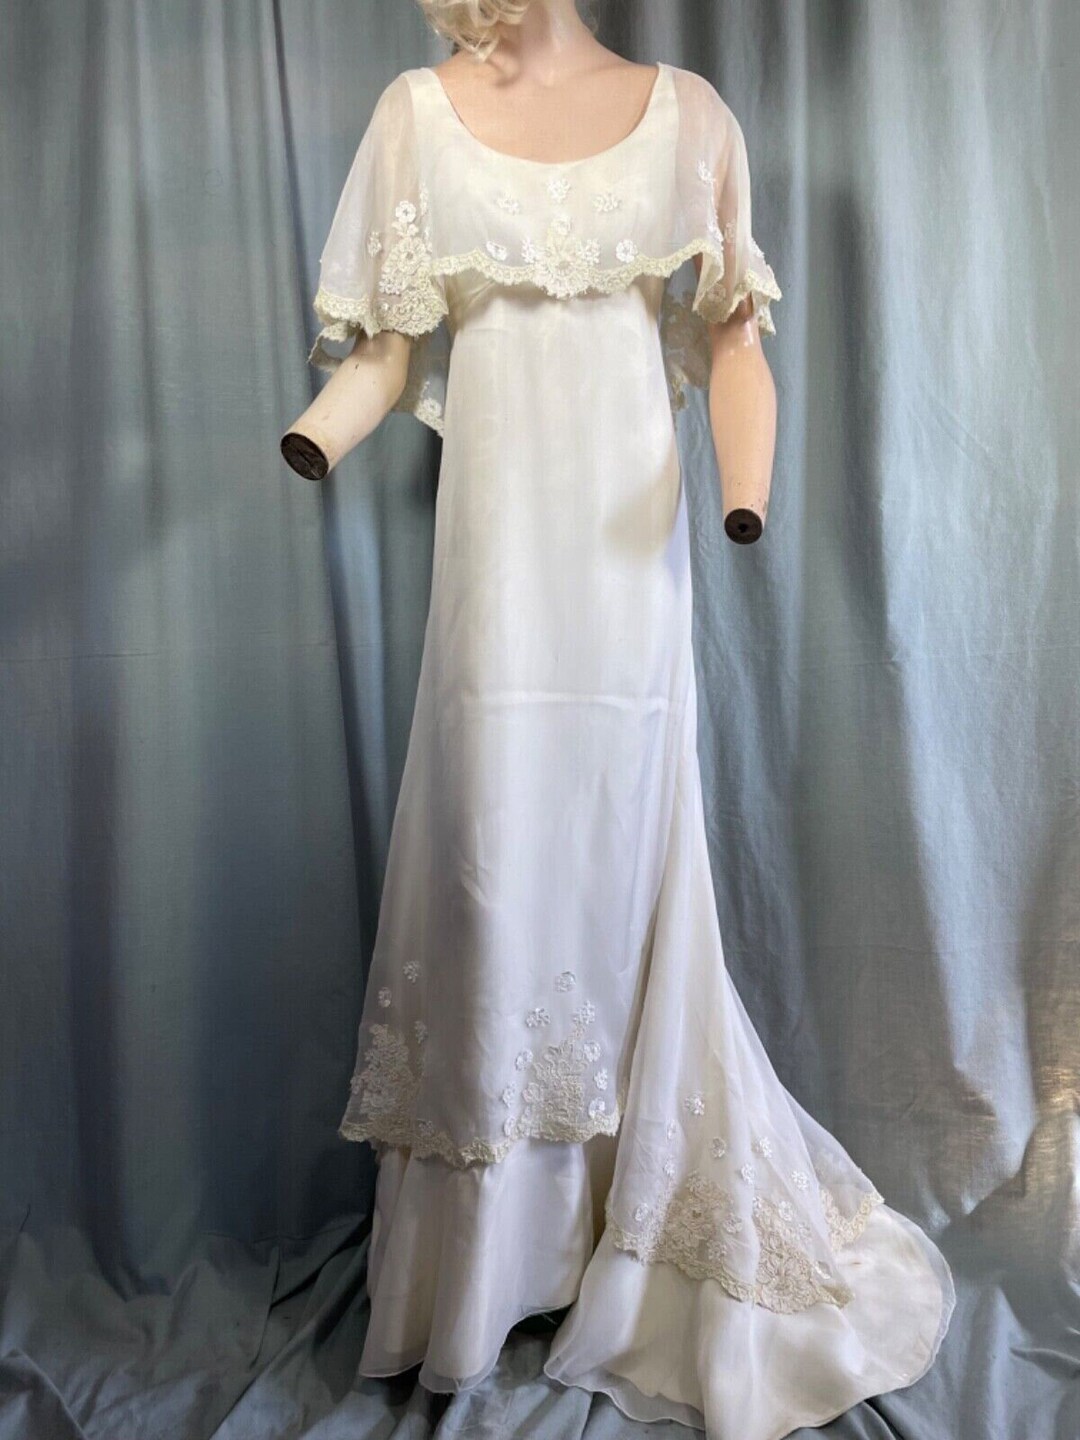 1970s Vintage Bridal Gown Gatsby Era Style of the 1920-30s - Etsy